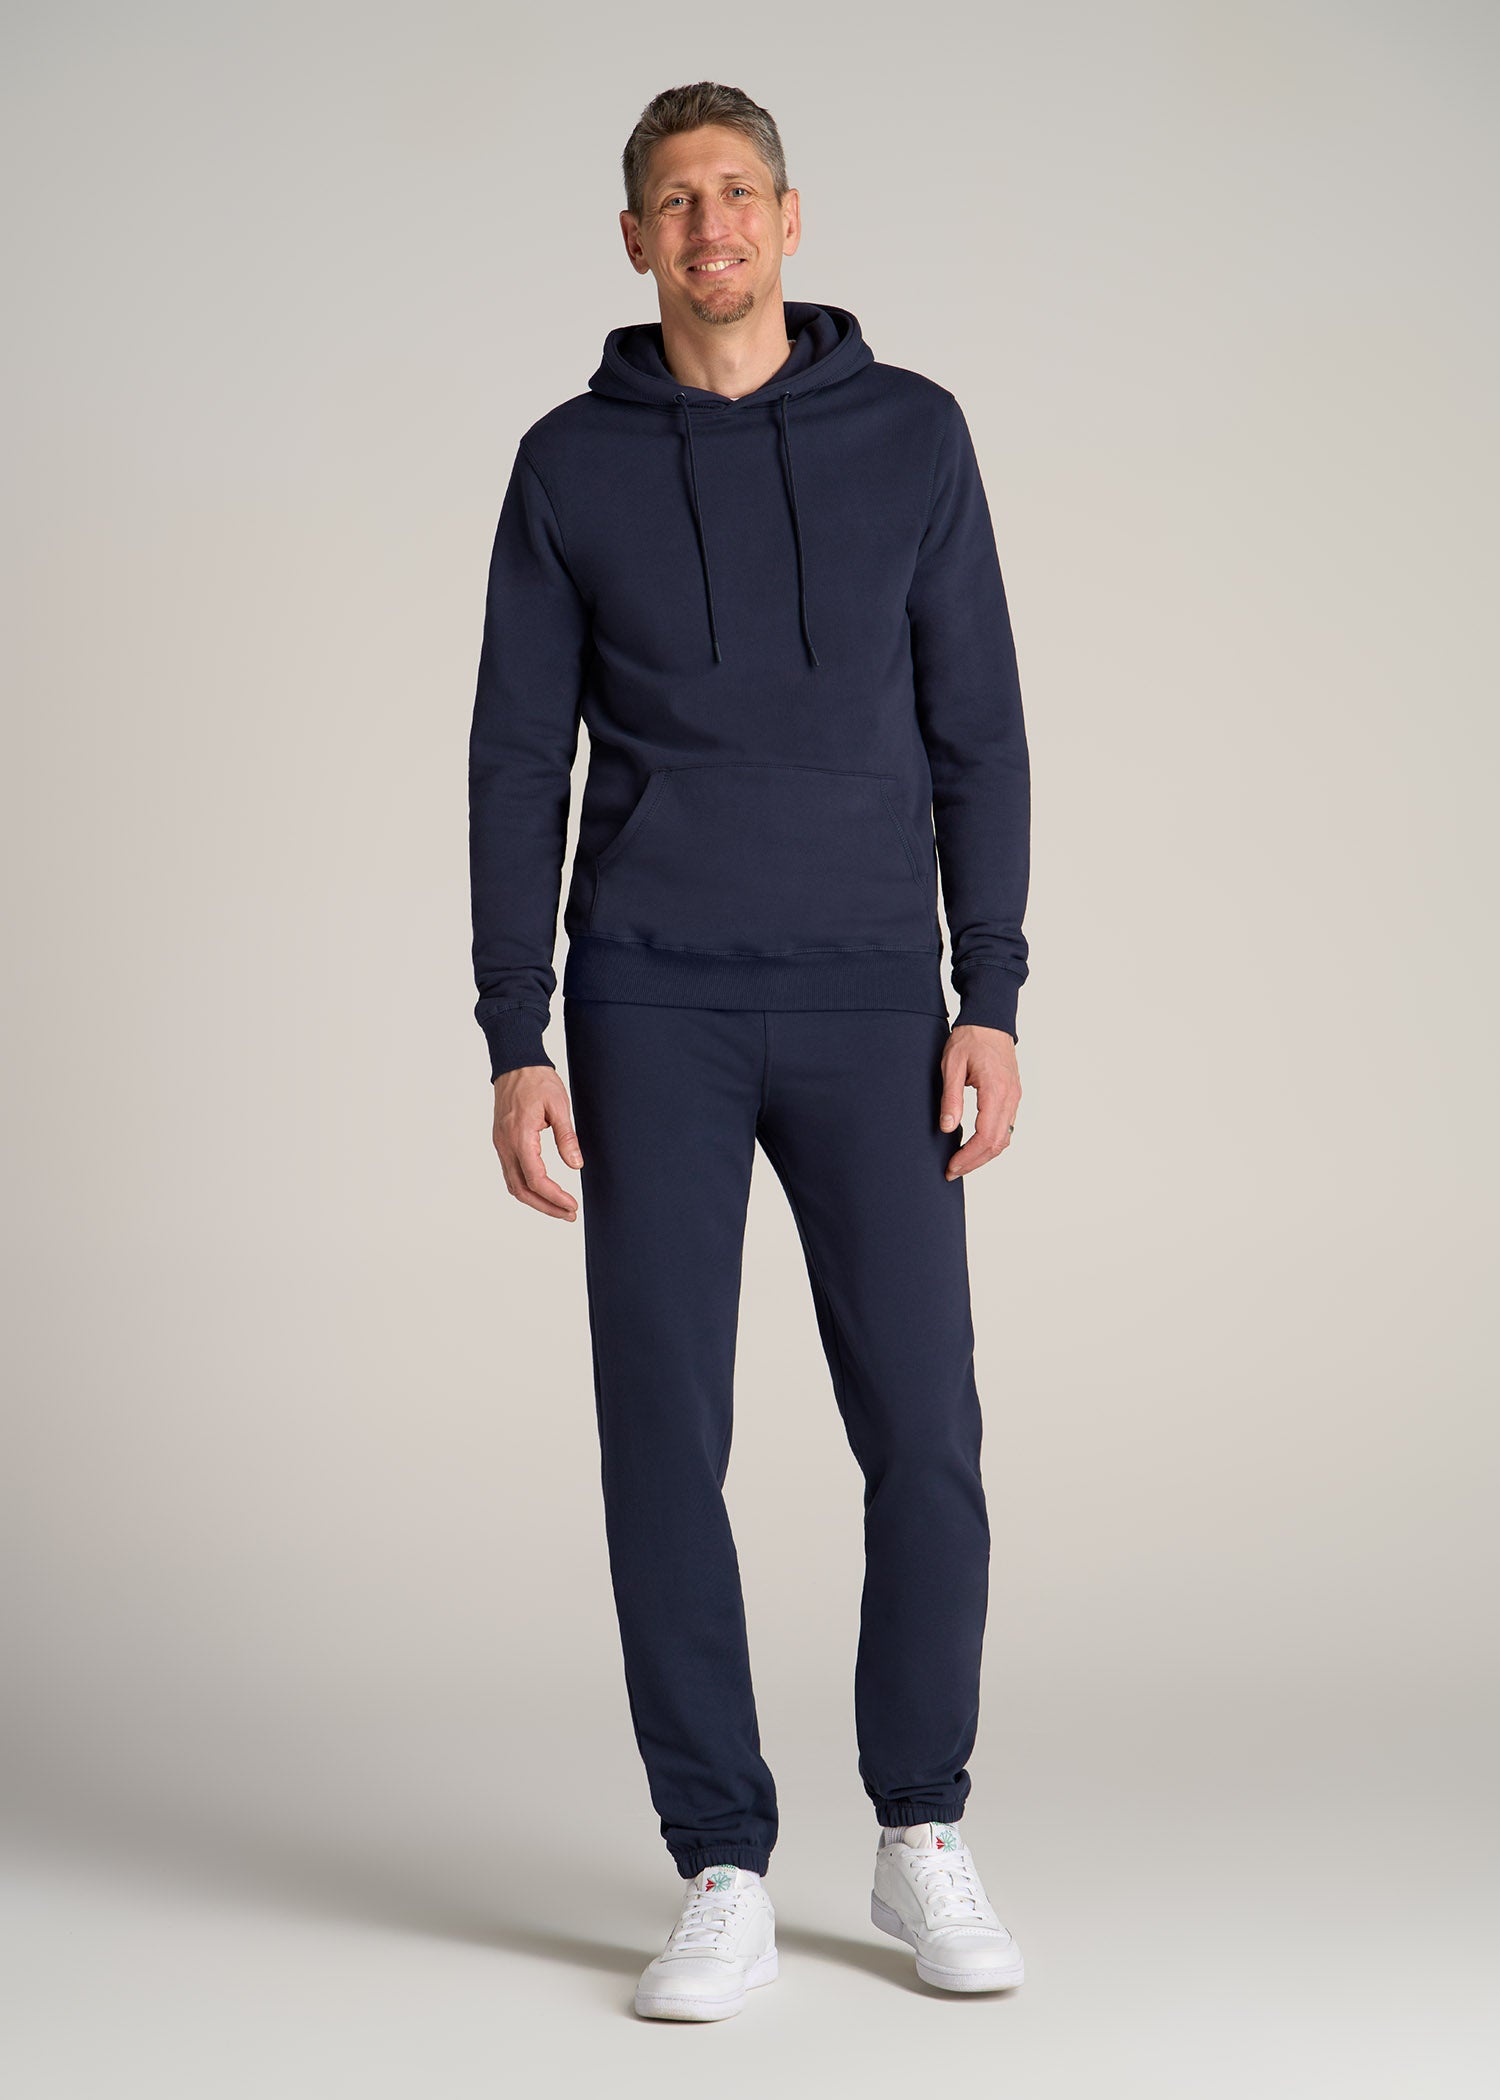 Wearever French Terry Sweatpants for Tall Men in Navy